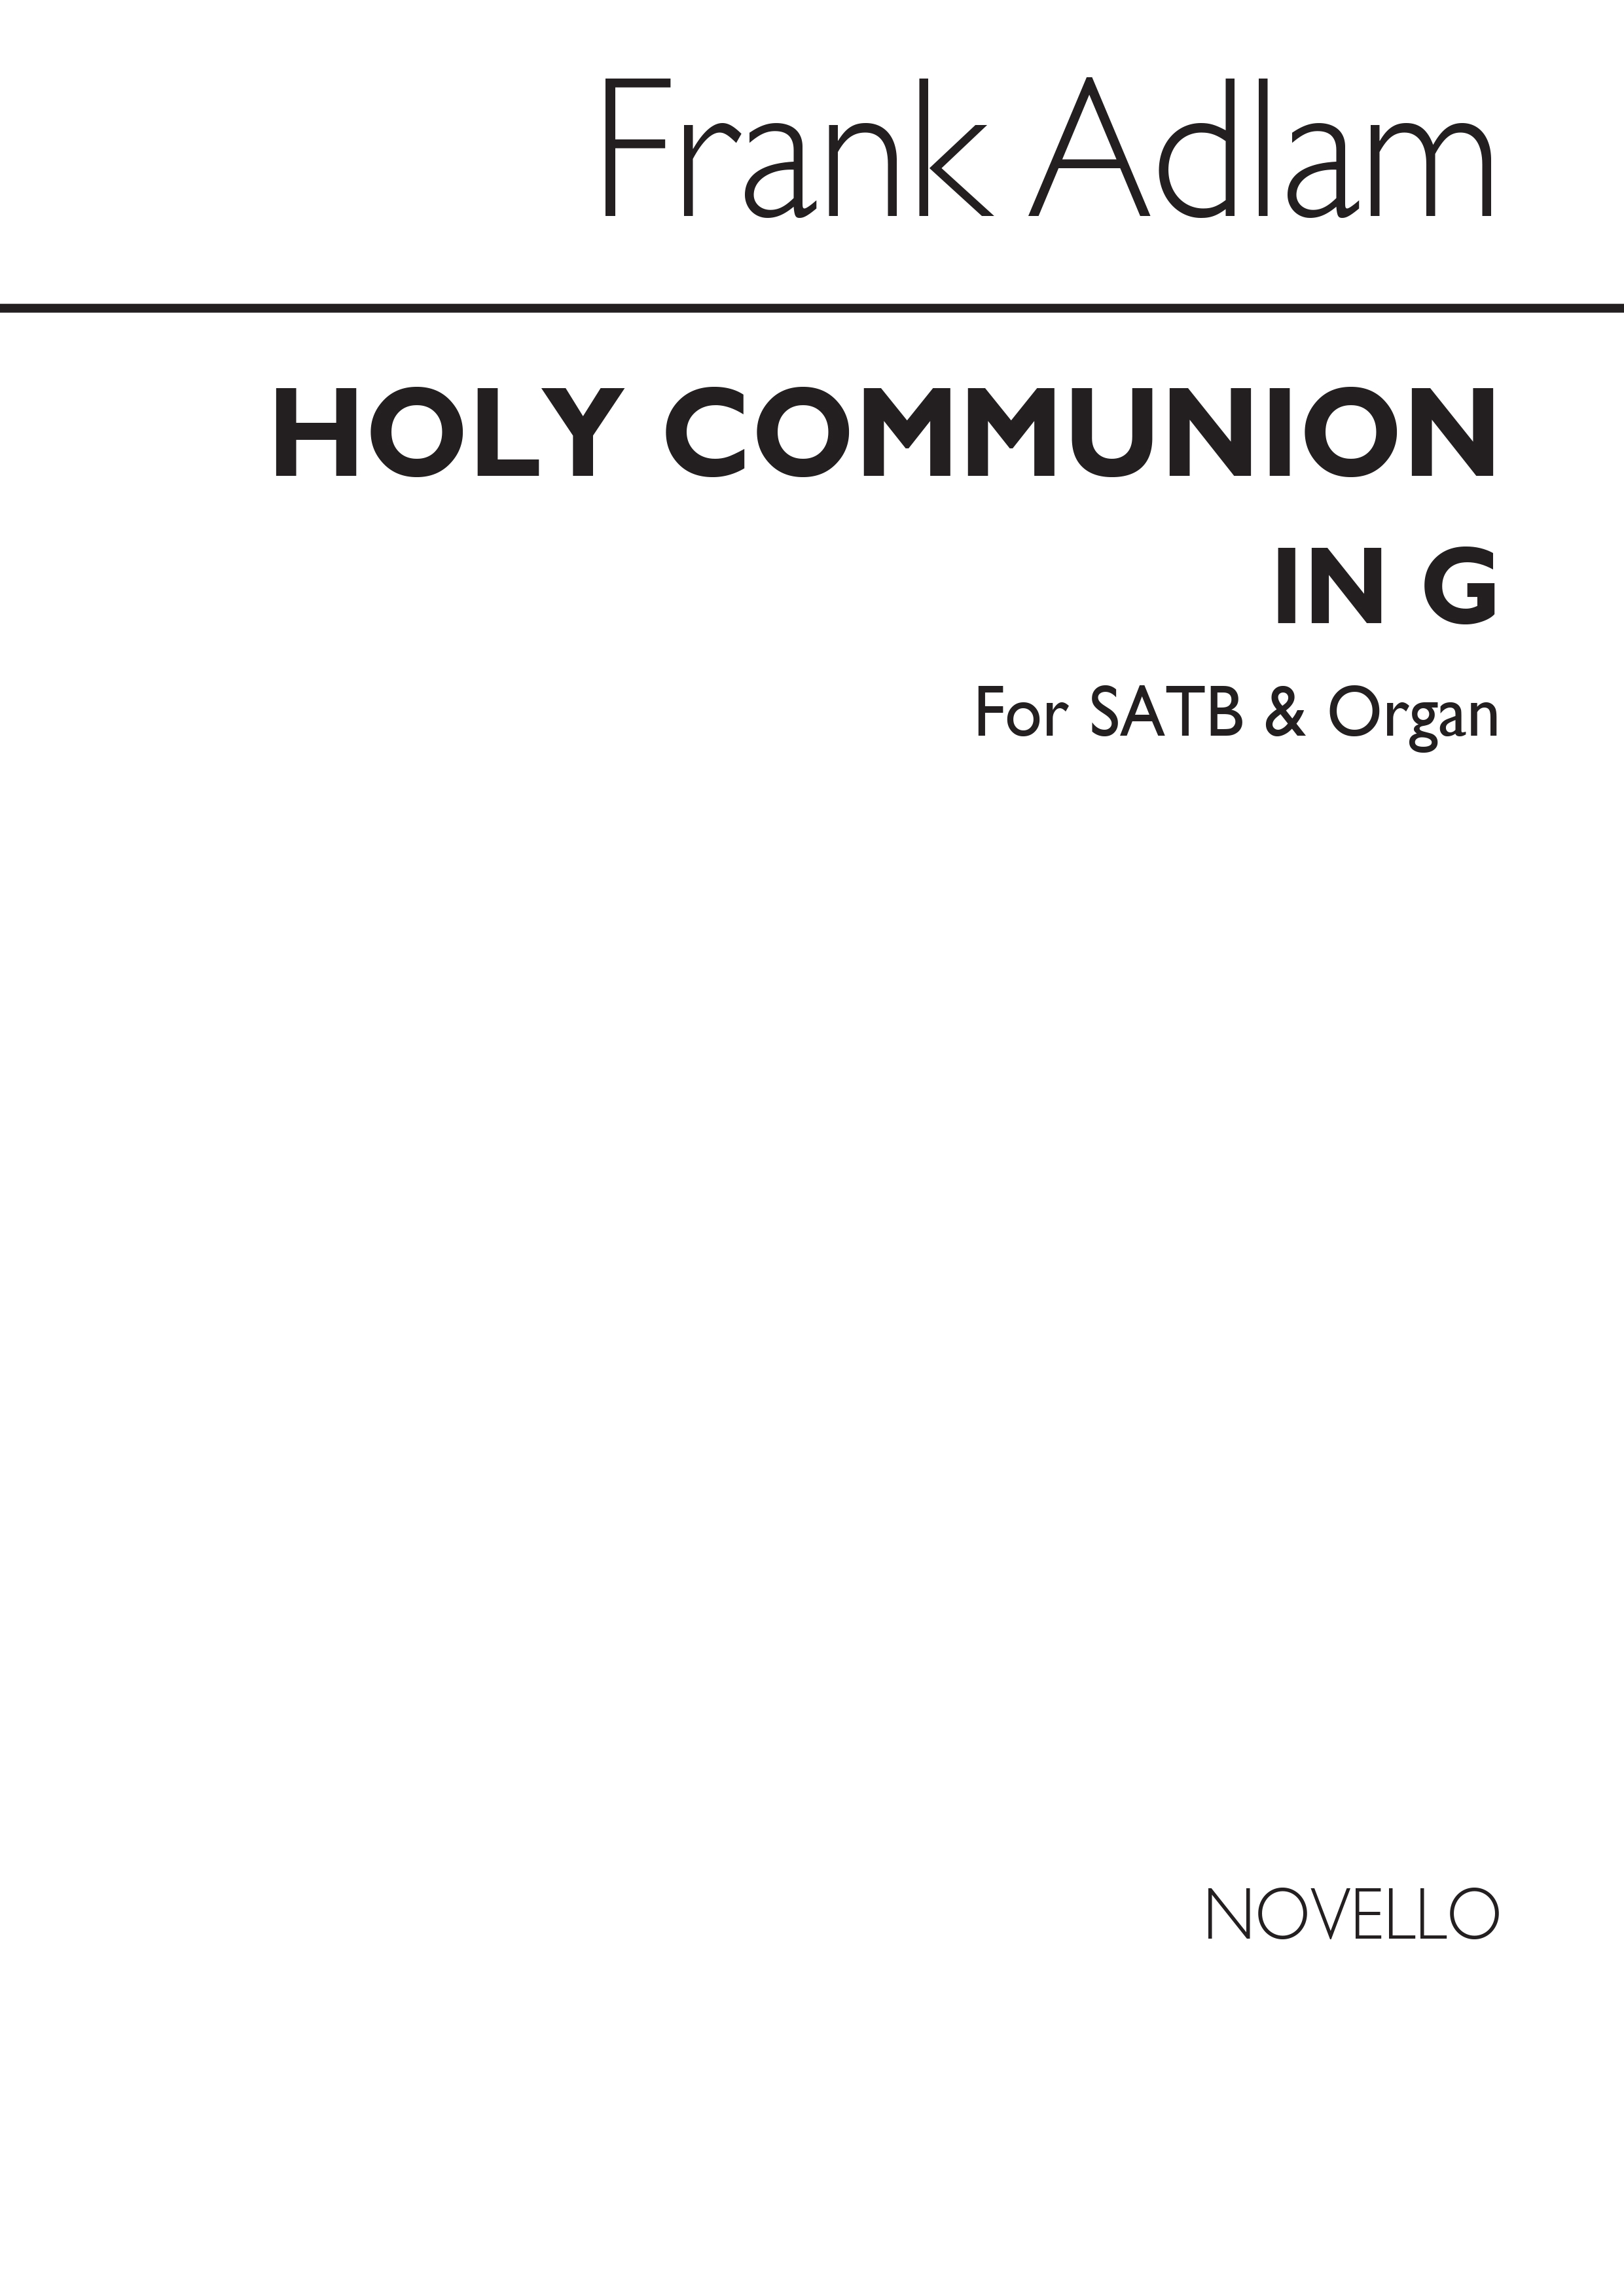 Frank Adlam: The Office Of The Holy Communion In G